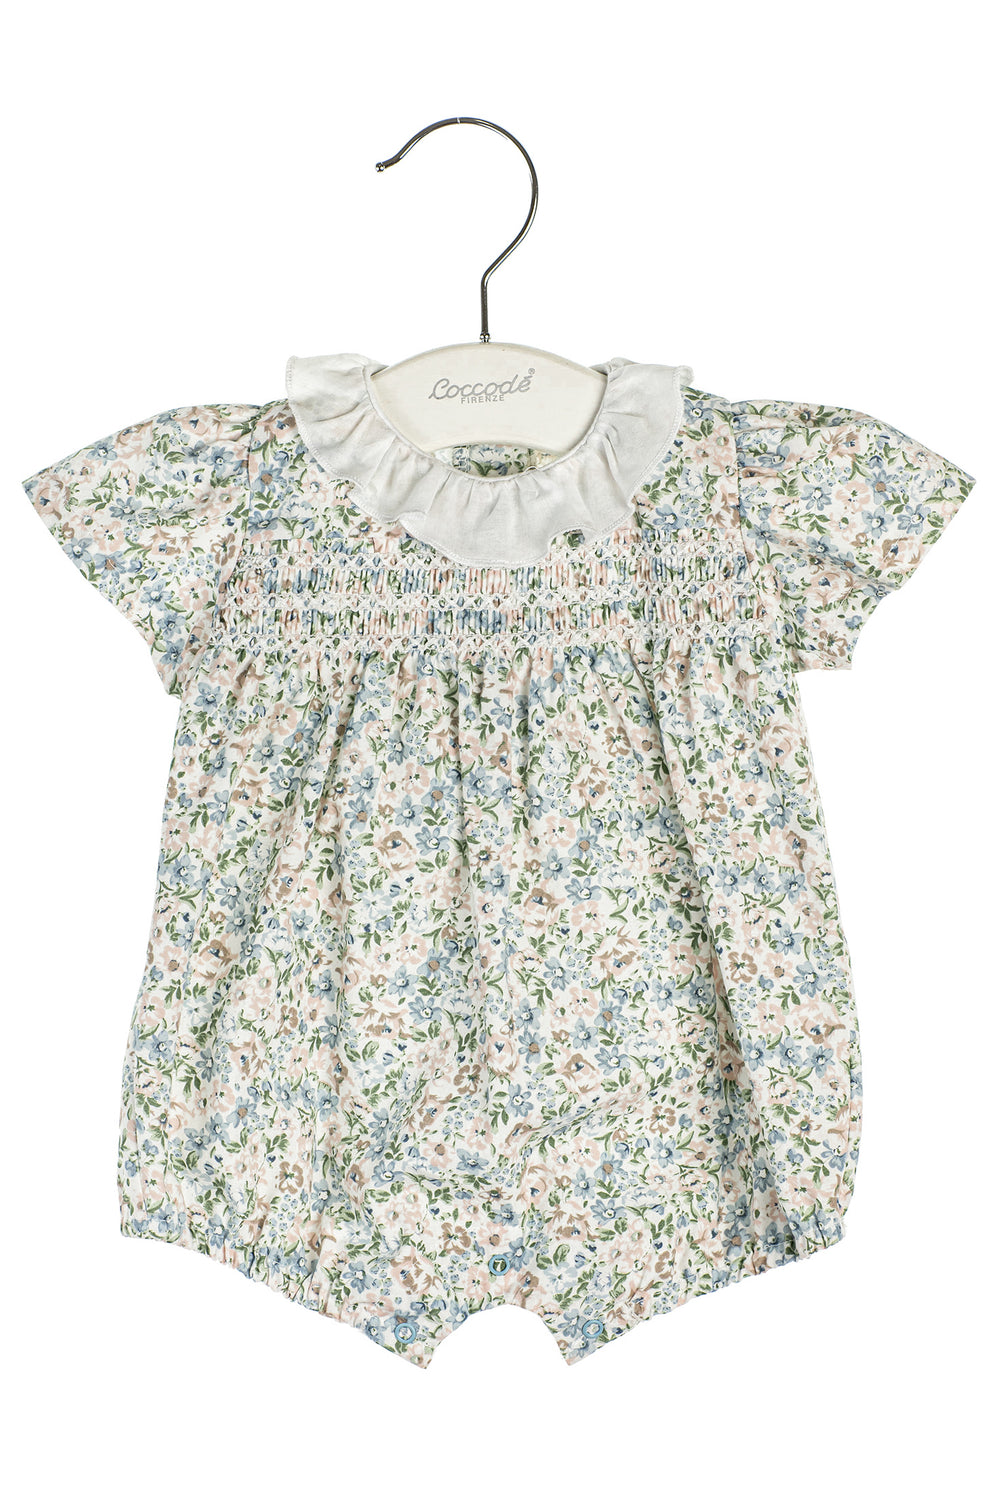 Coccodè "Kalia" Blue Floral Smocked Romper | iphoneandroidapplications